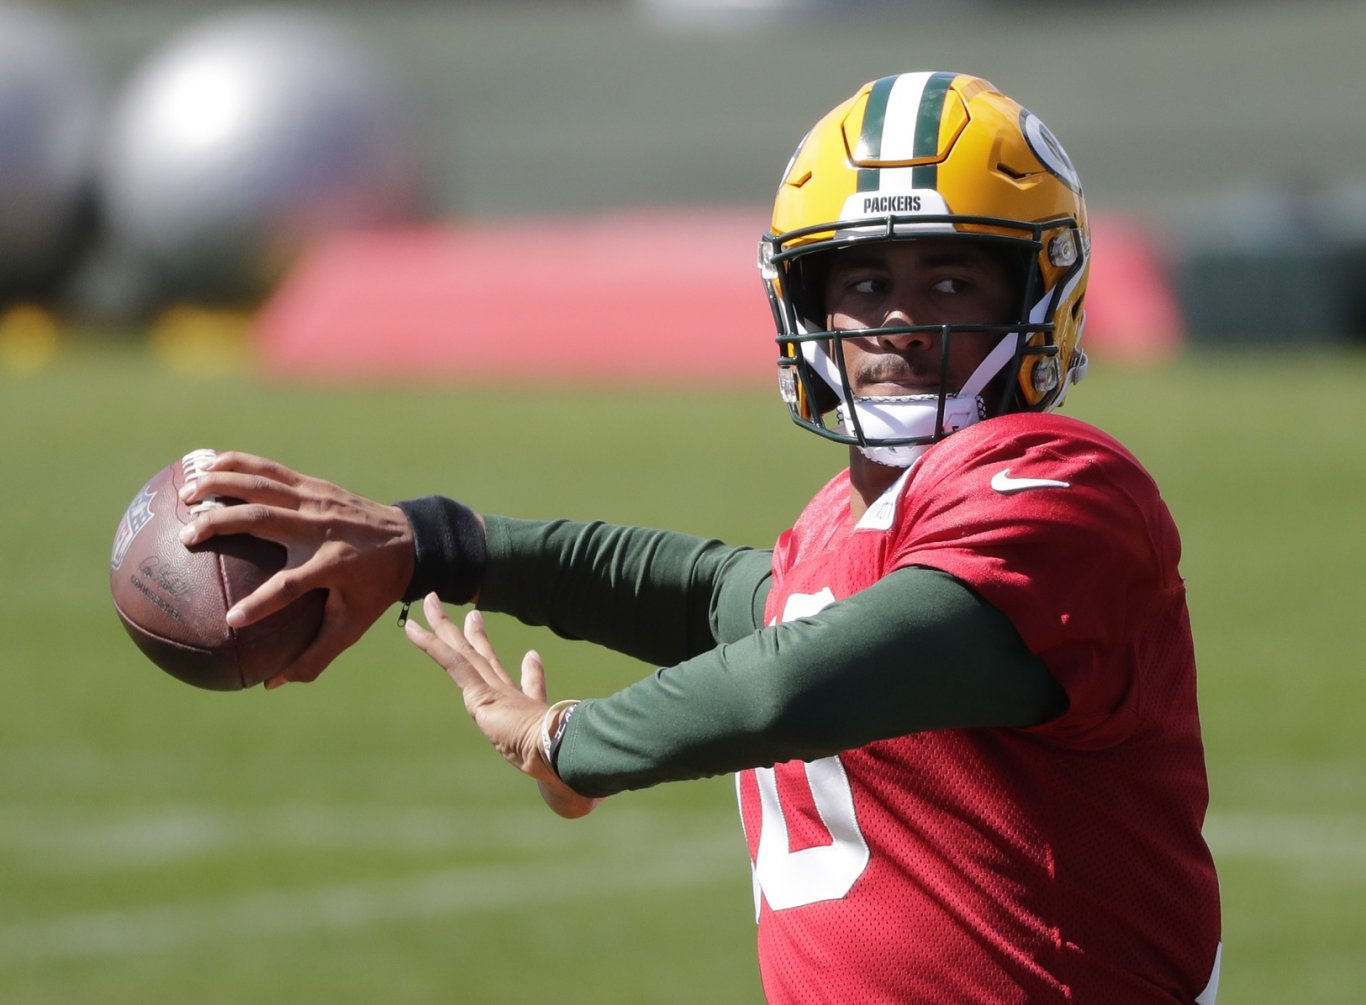 No excuses for Jordan Love as Packers starting QB